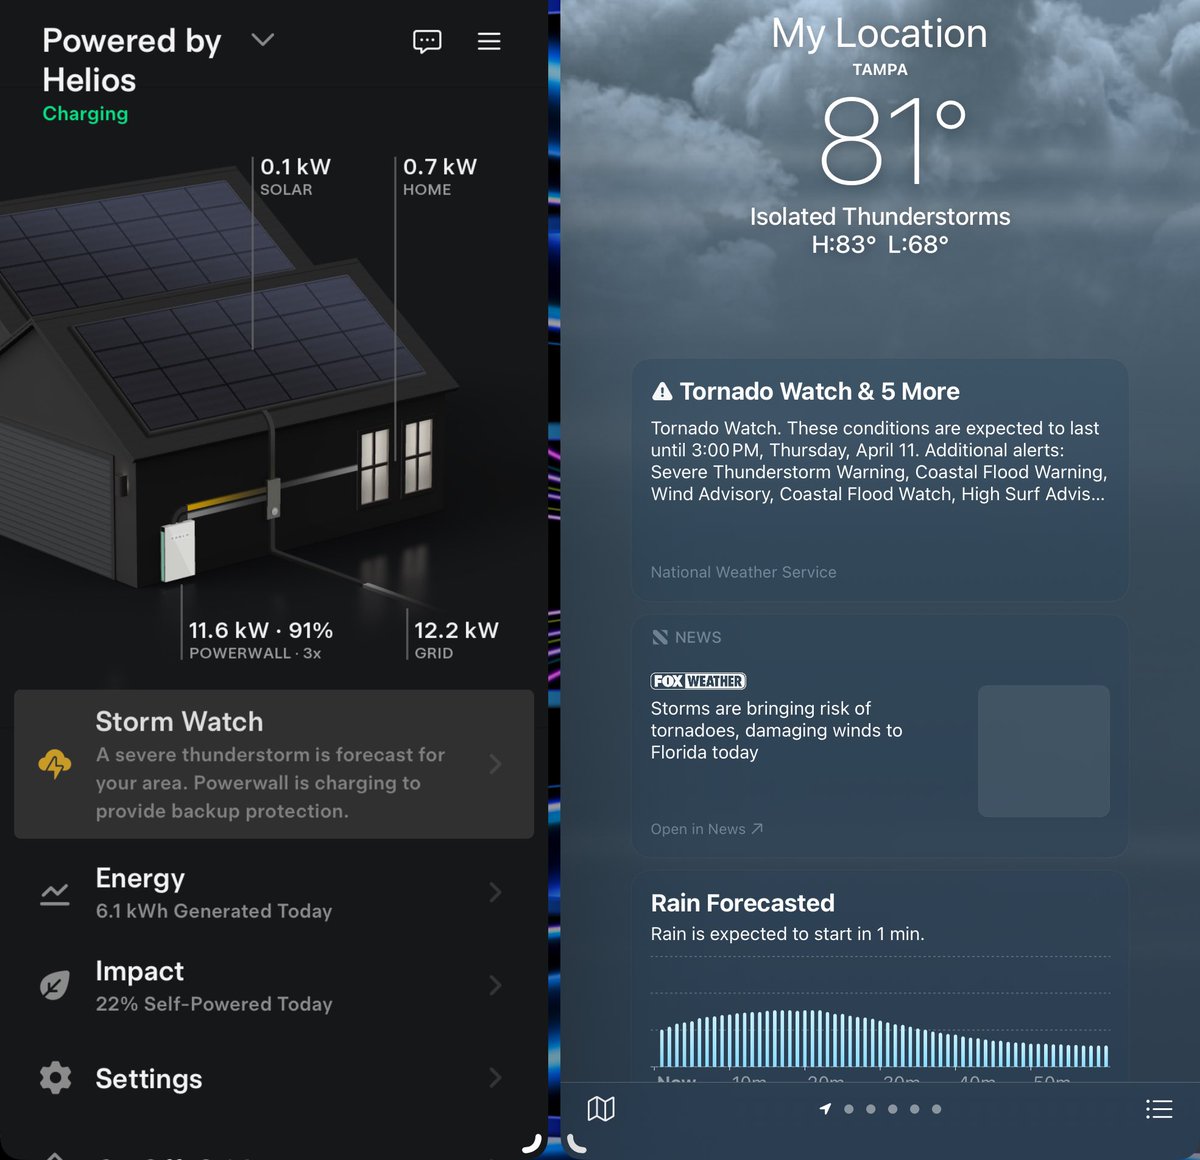 🌩️ 'Storm Watch' activated! ⚡️ With a severe thunderstorm warning in our area, our trusty Powerwalls are on guard, charging and ready to weather the storm! 💪 Stay safe and stay powered, folks! ☔️ #Powerwall #StormWatch #SevereThunderstorm #StaySafe